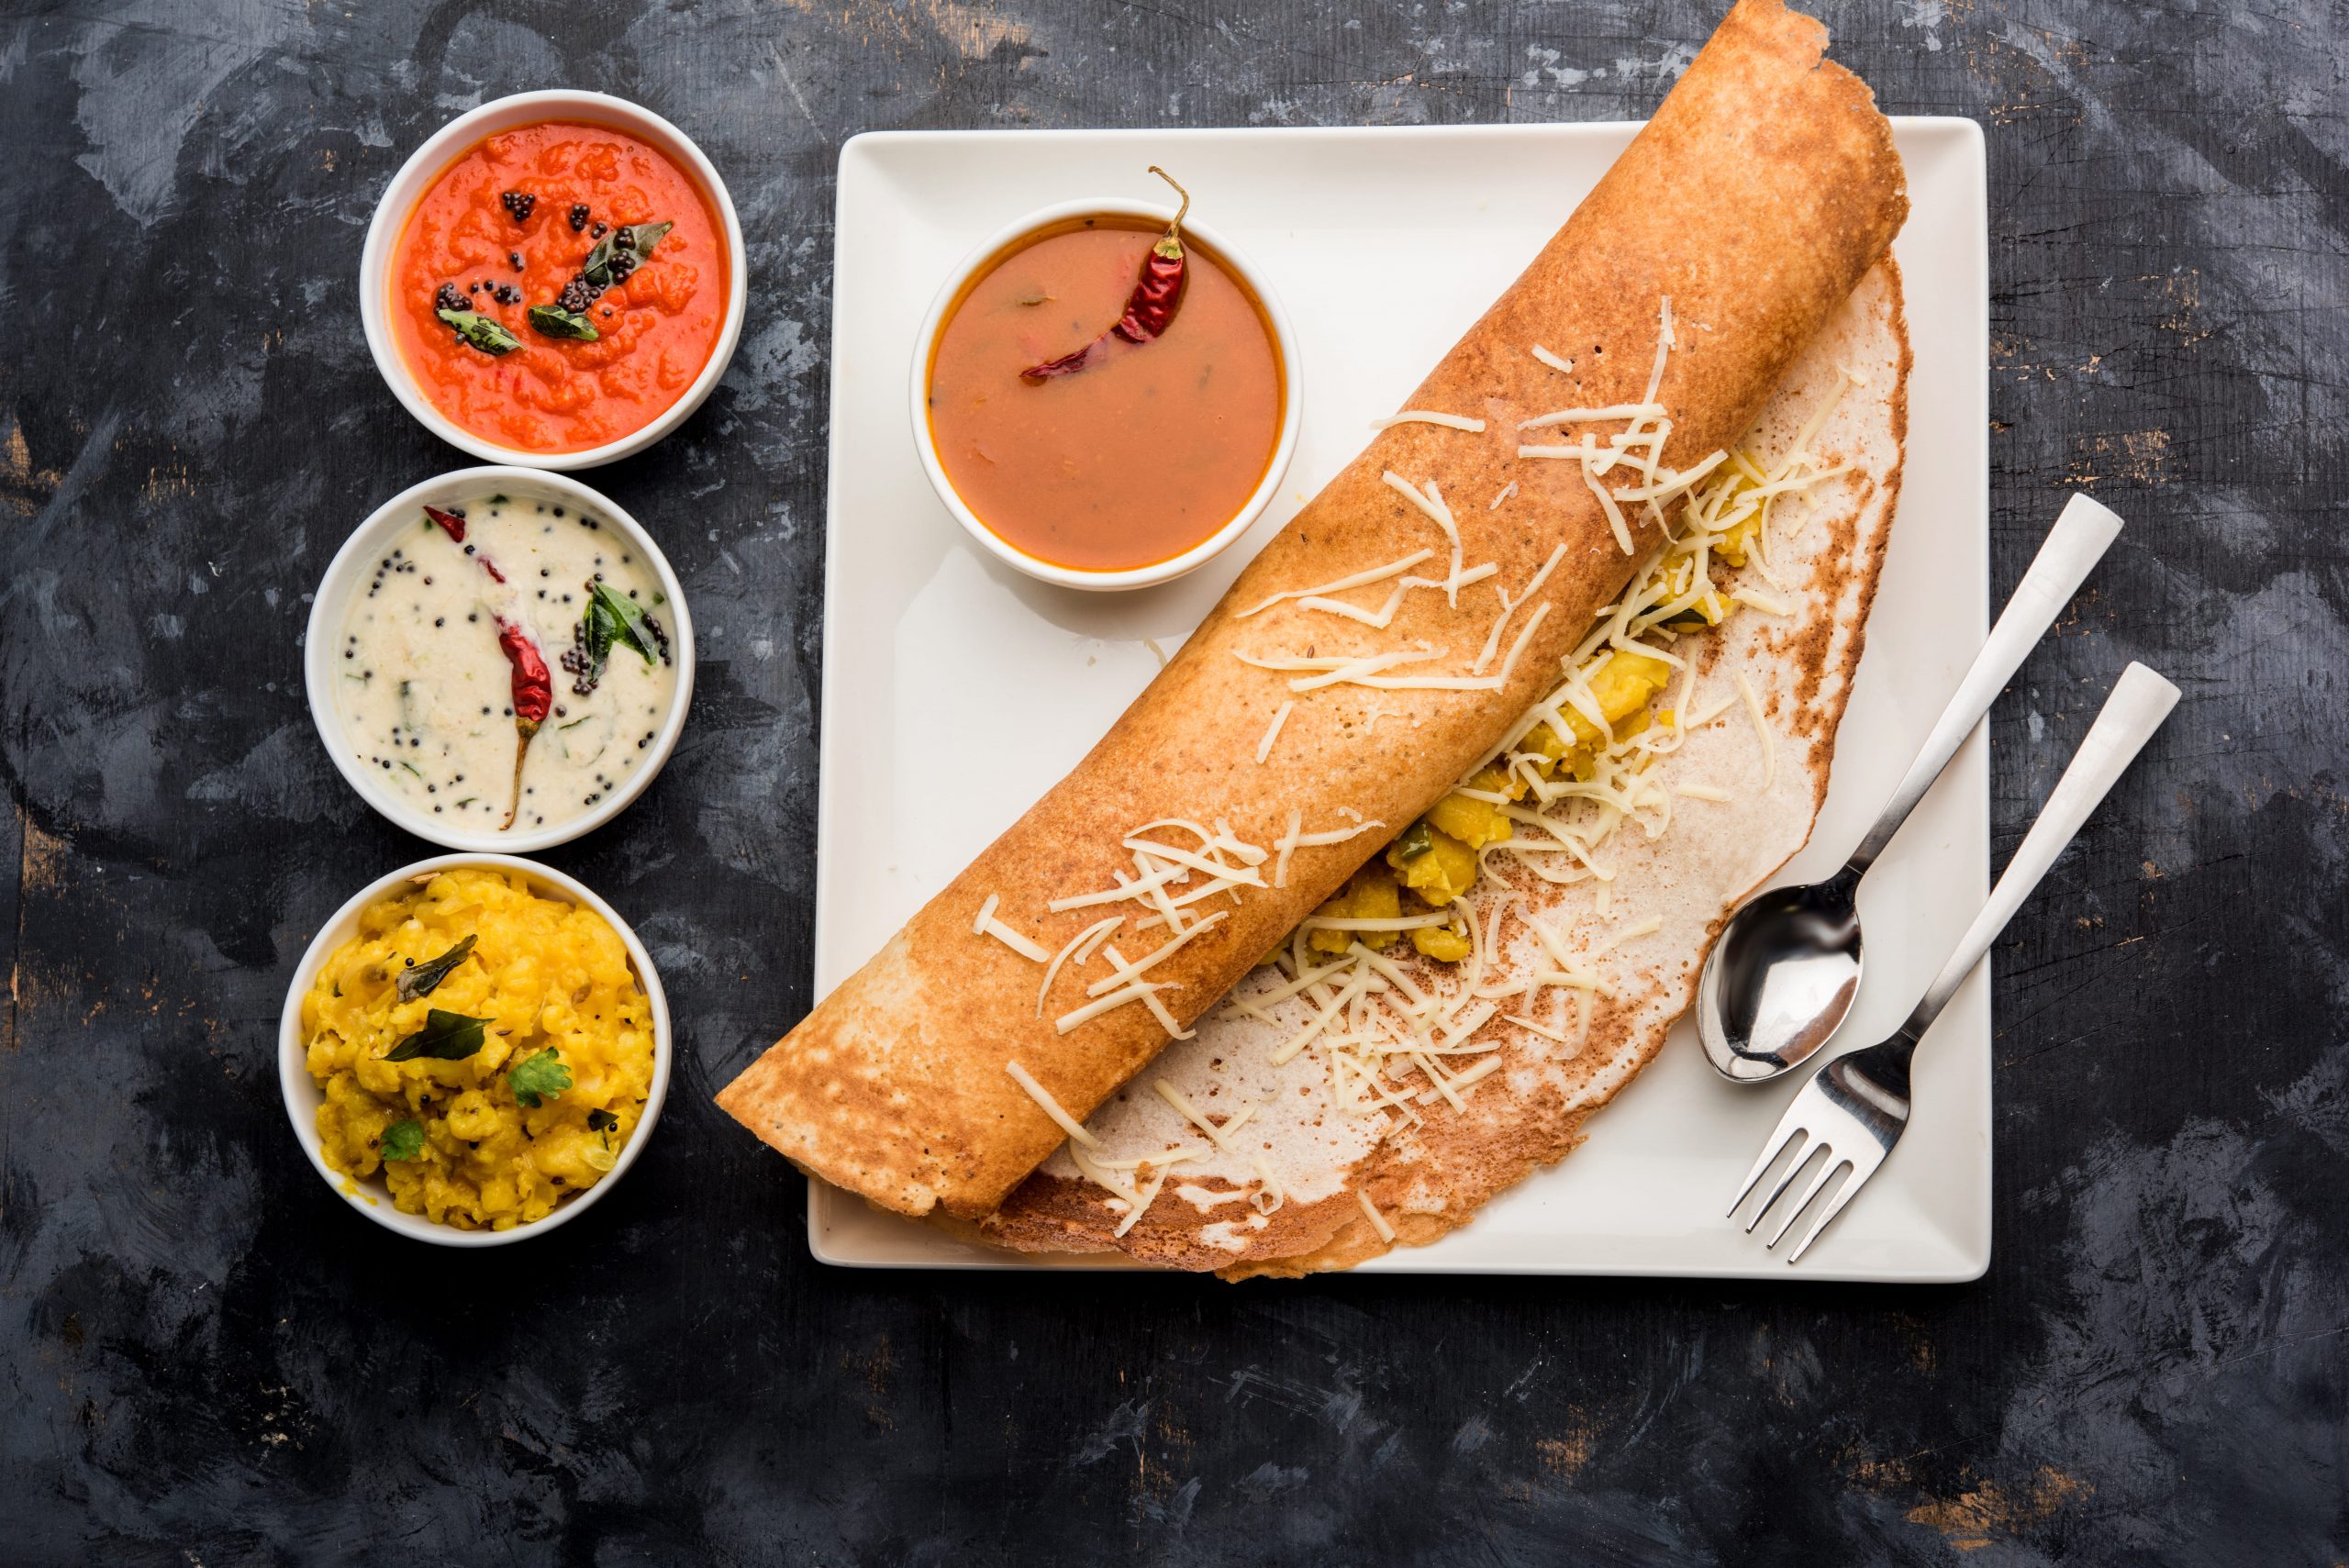 Cheese Masala Dosa Is A South Indian Food 2021 08 28 01 07 56 Utc 1 1 Scaled 